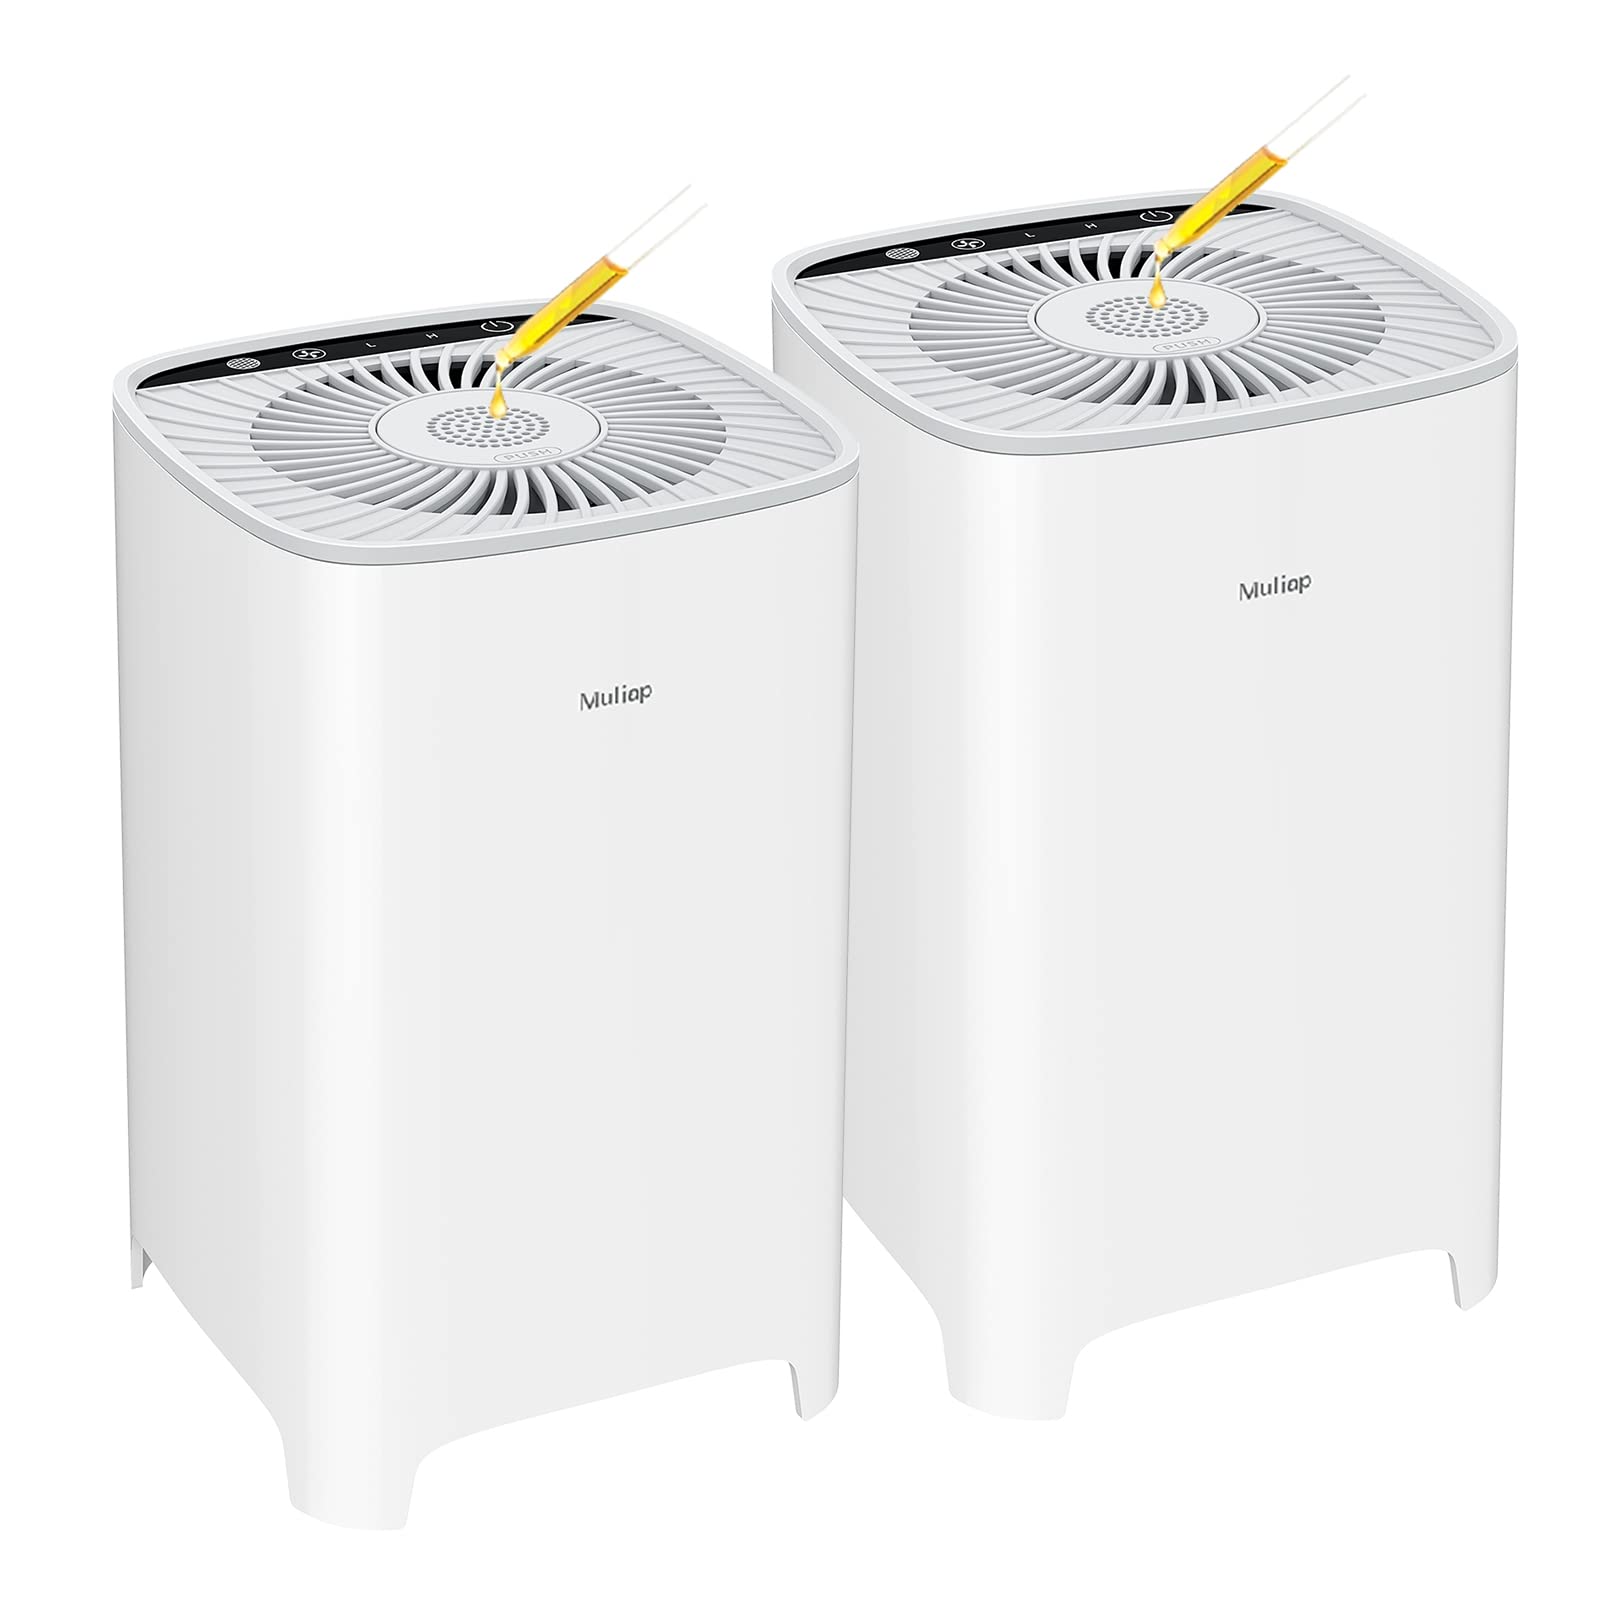 Muliap Air Purifiers with H13 Hepa Filter